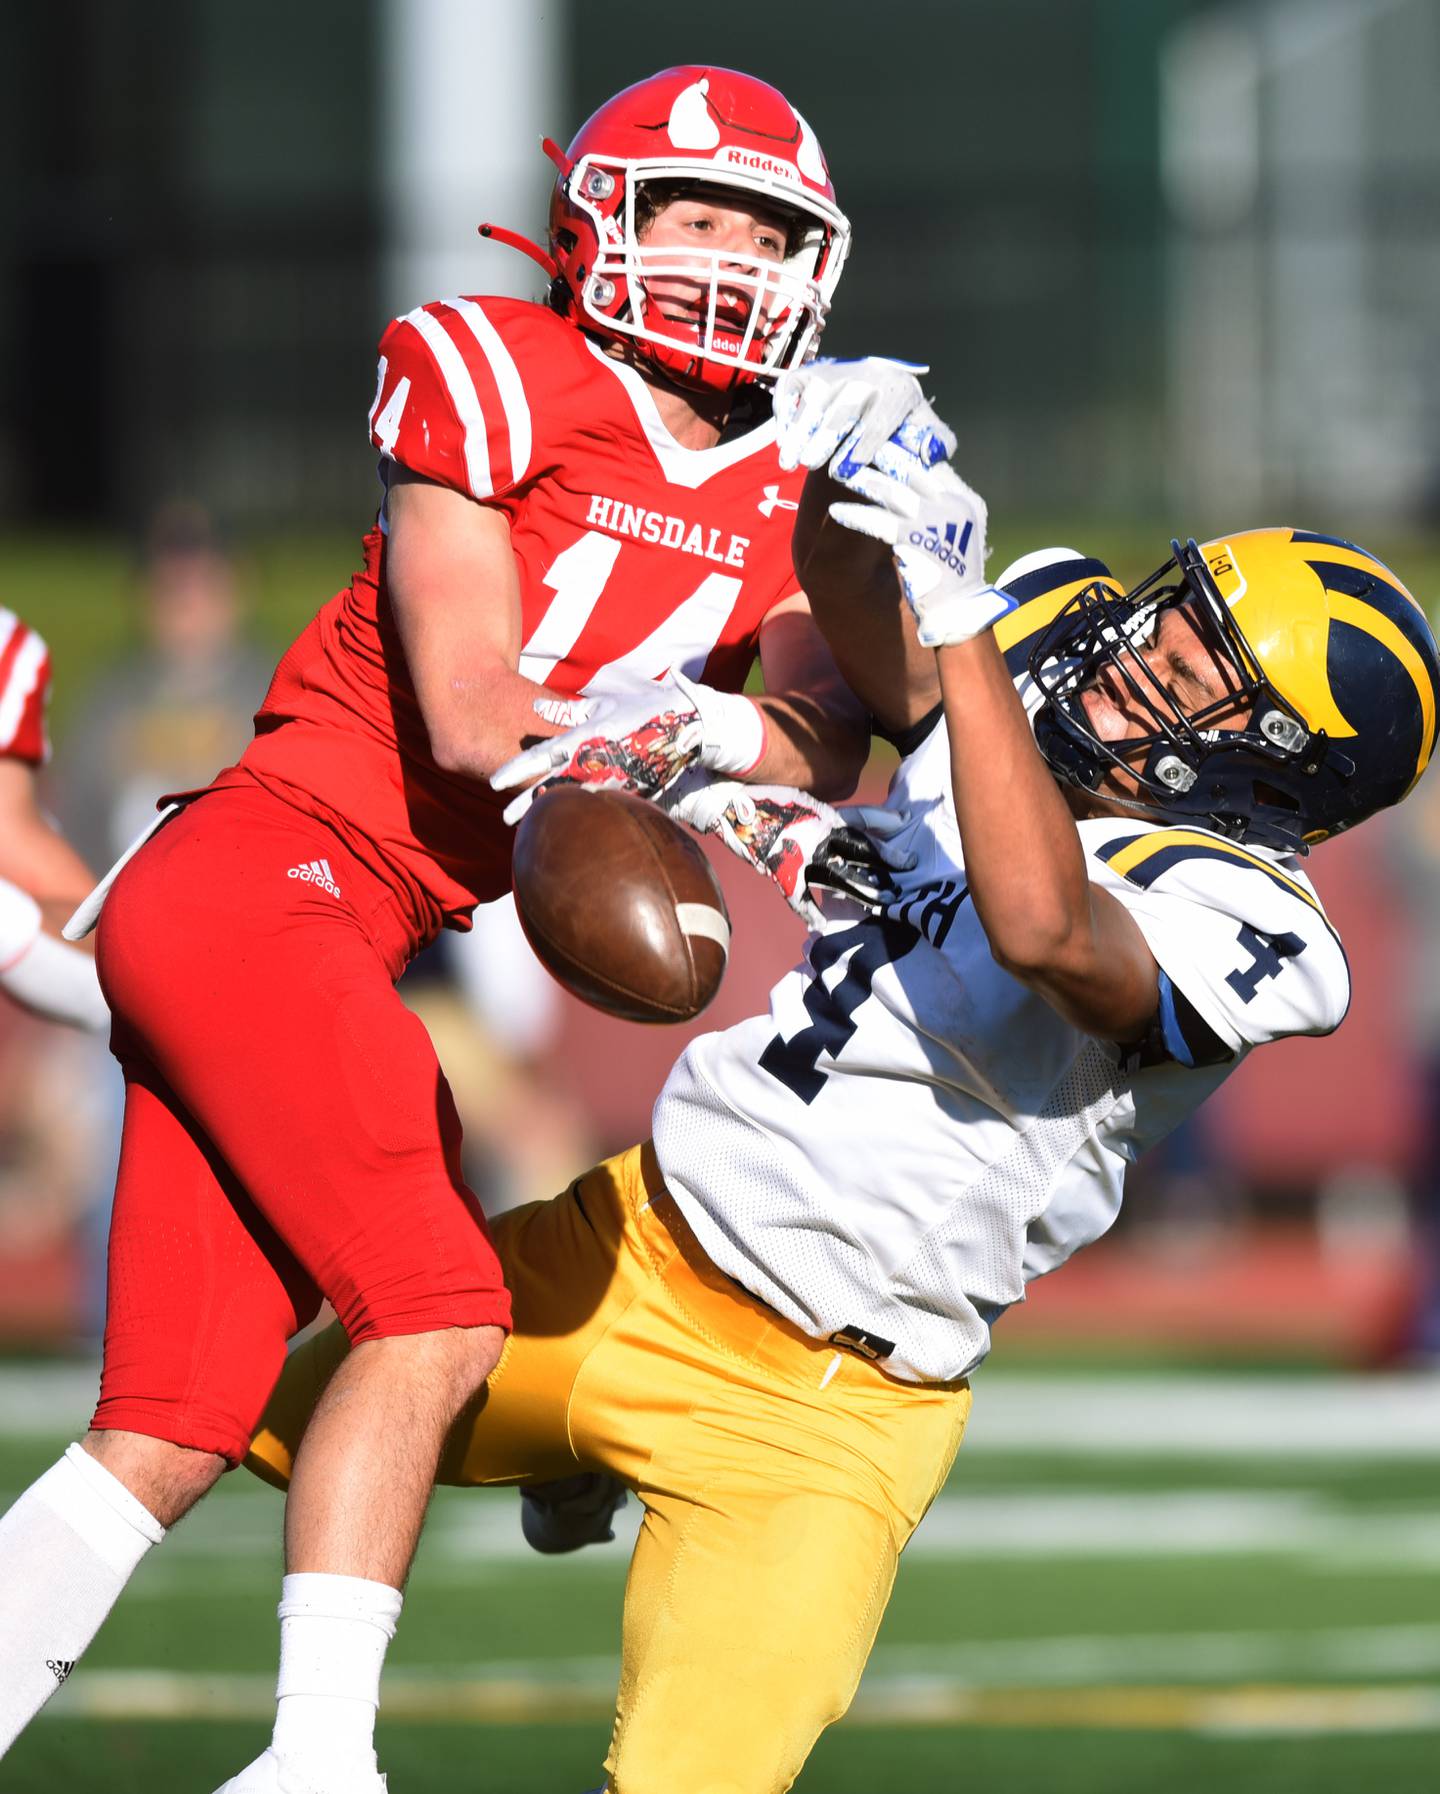 Hinsdale Central's Gavin Vande Lune, left, breaks up a pass intended for Glenbrook South's Carmelo Livatino during the second round of the Class 8A high school football playoffs in Hinsdale Saturday.